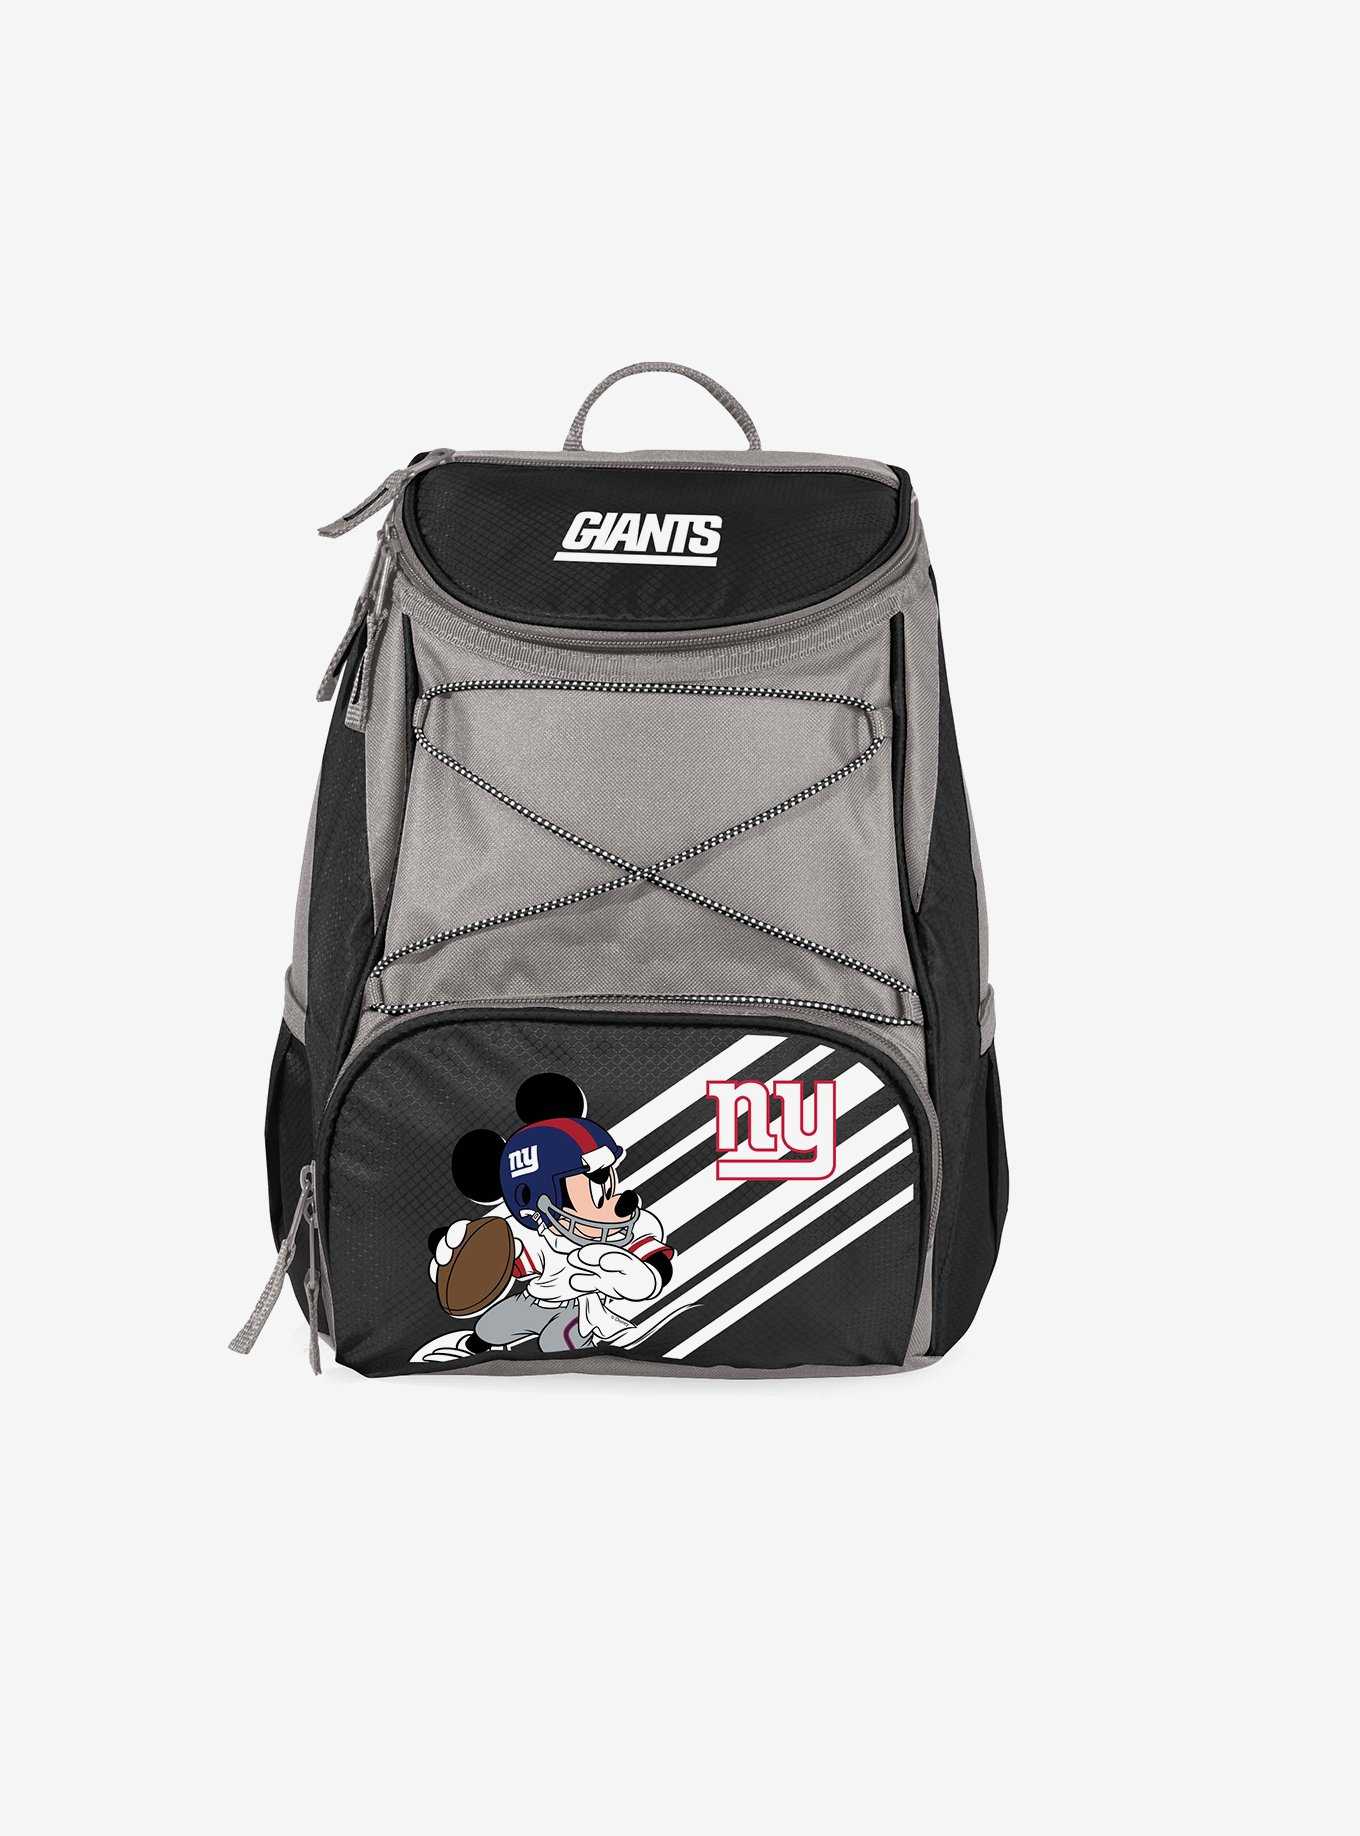 Disney Mickey Mouse NFL New York Giants Cooler Backpack, , hi-res